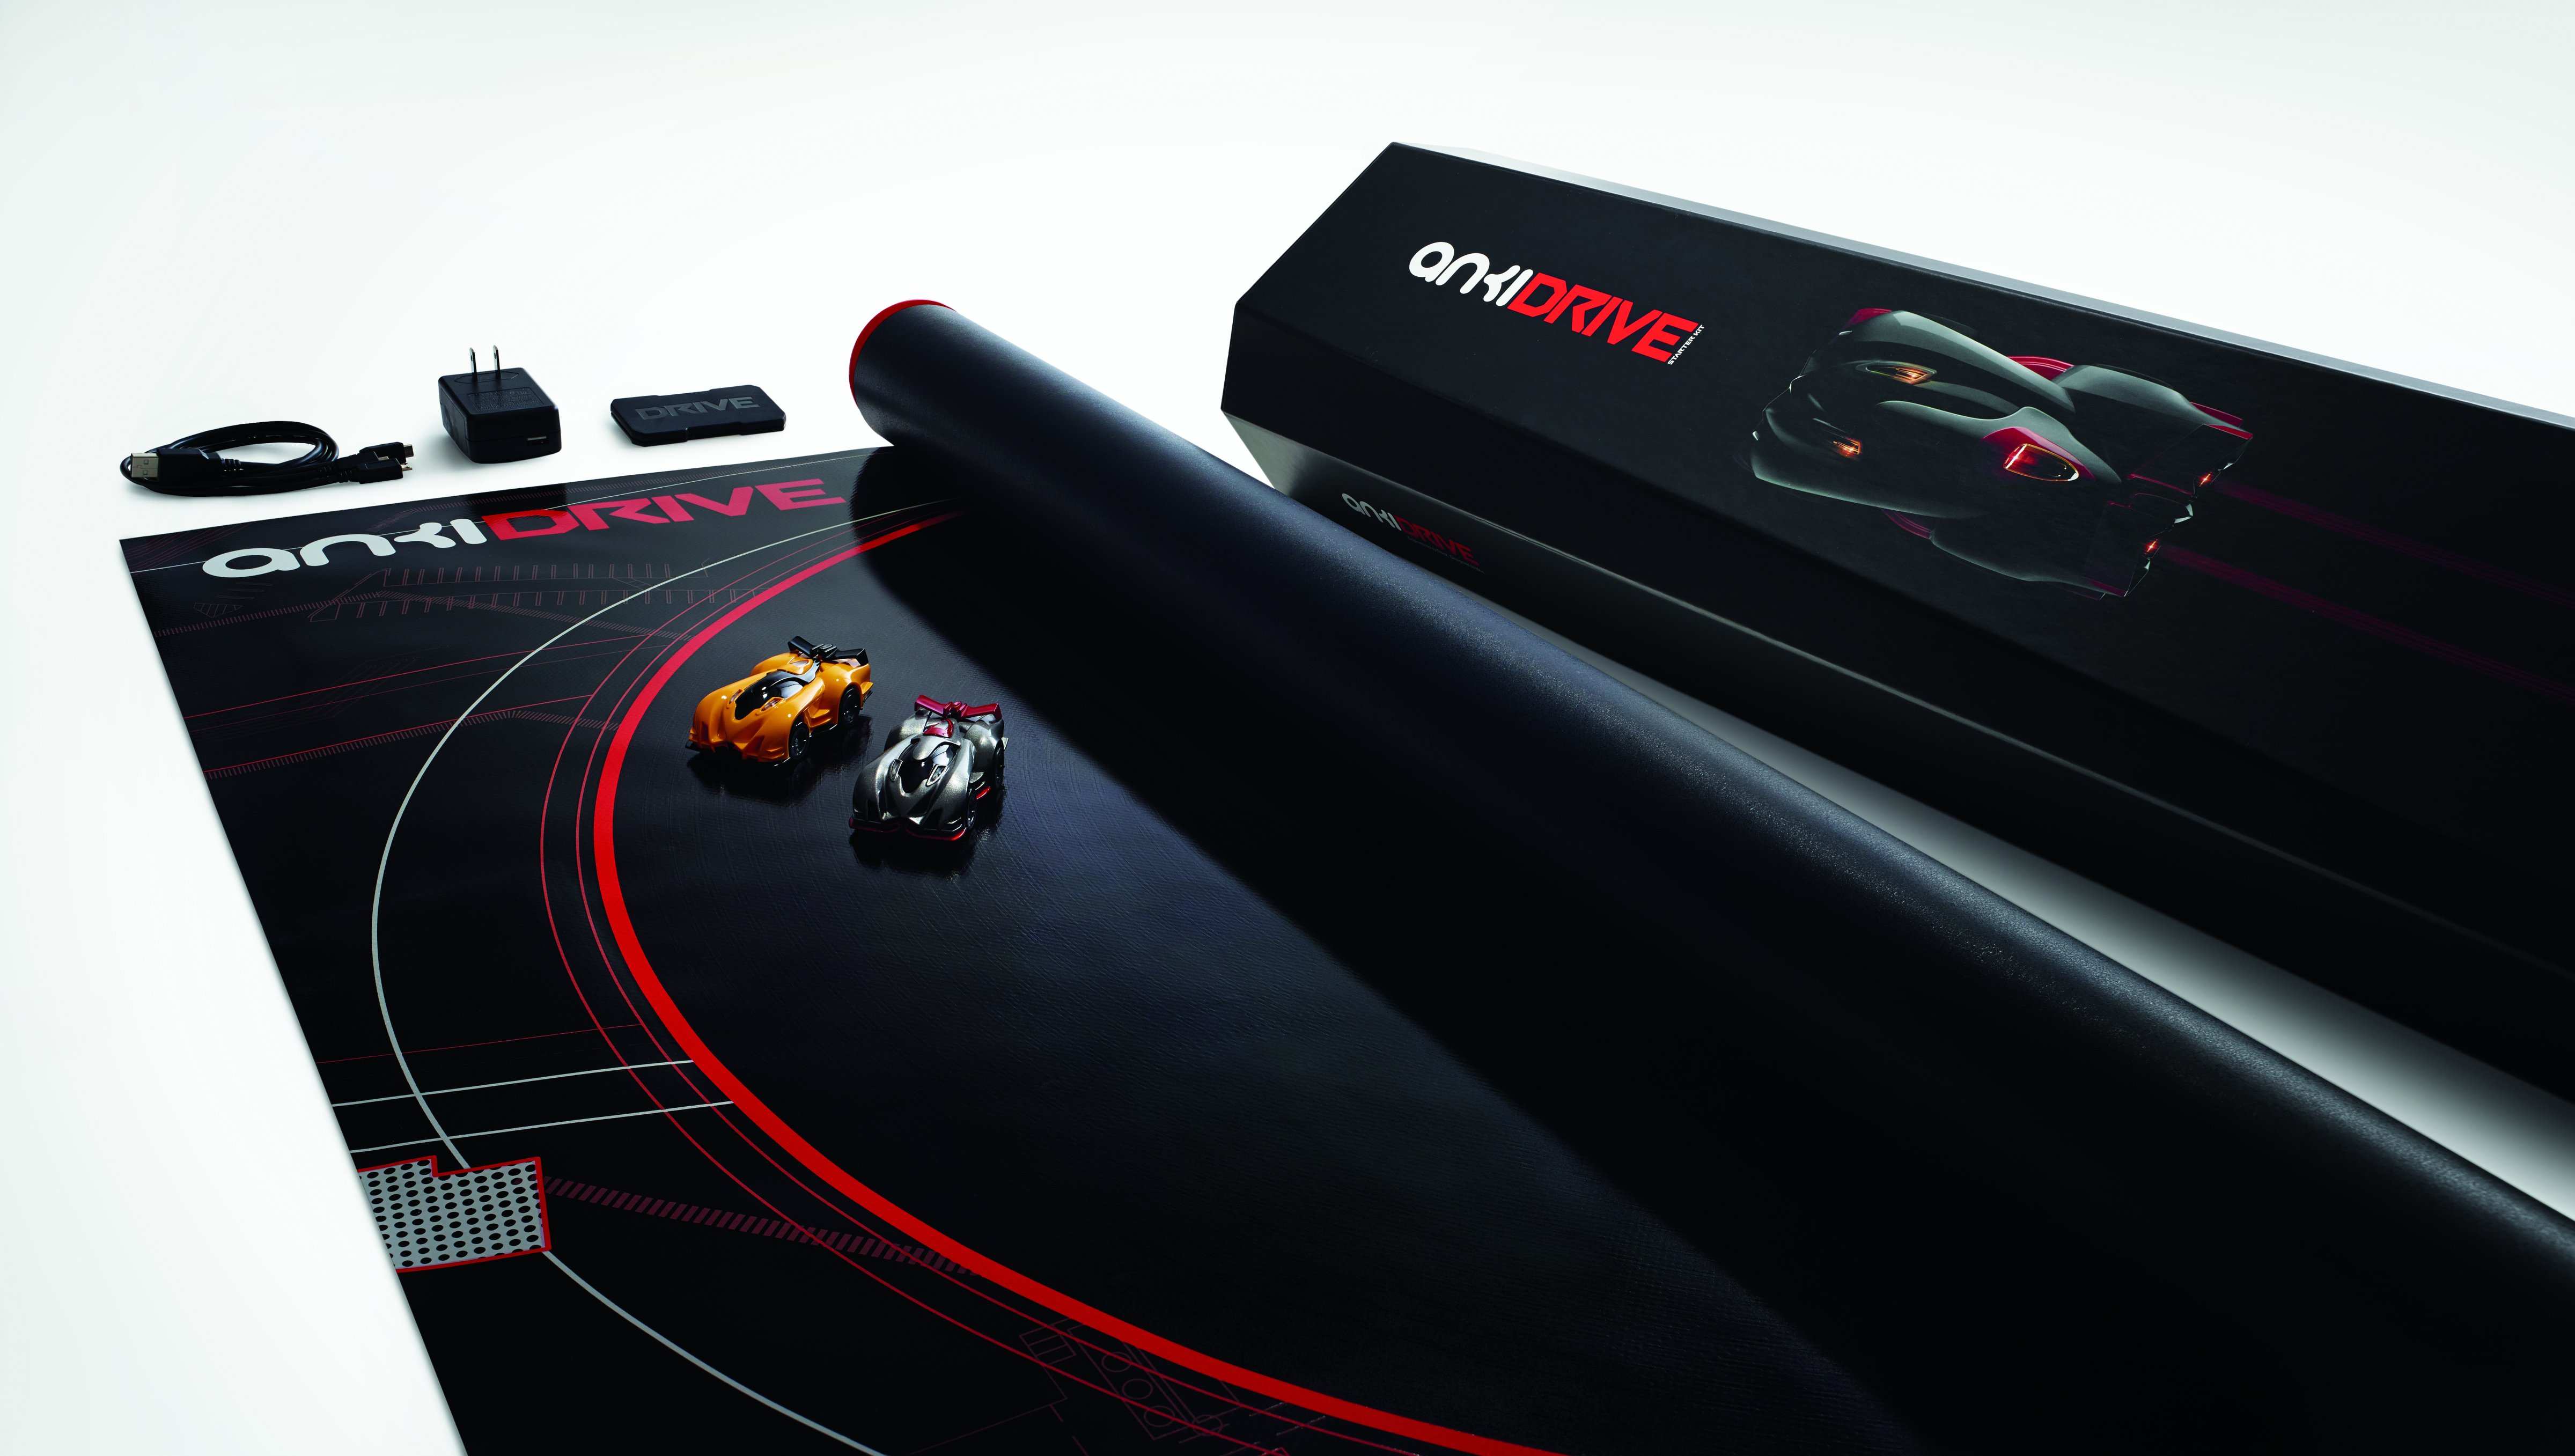 The Anki Drive game uses AI-enabled stock cars that players can control with their smartphones. (Anki)